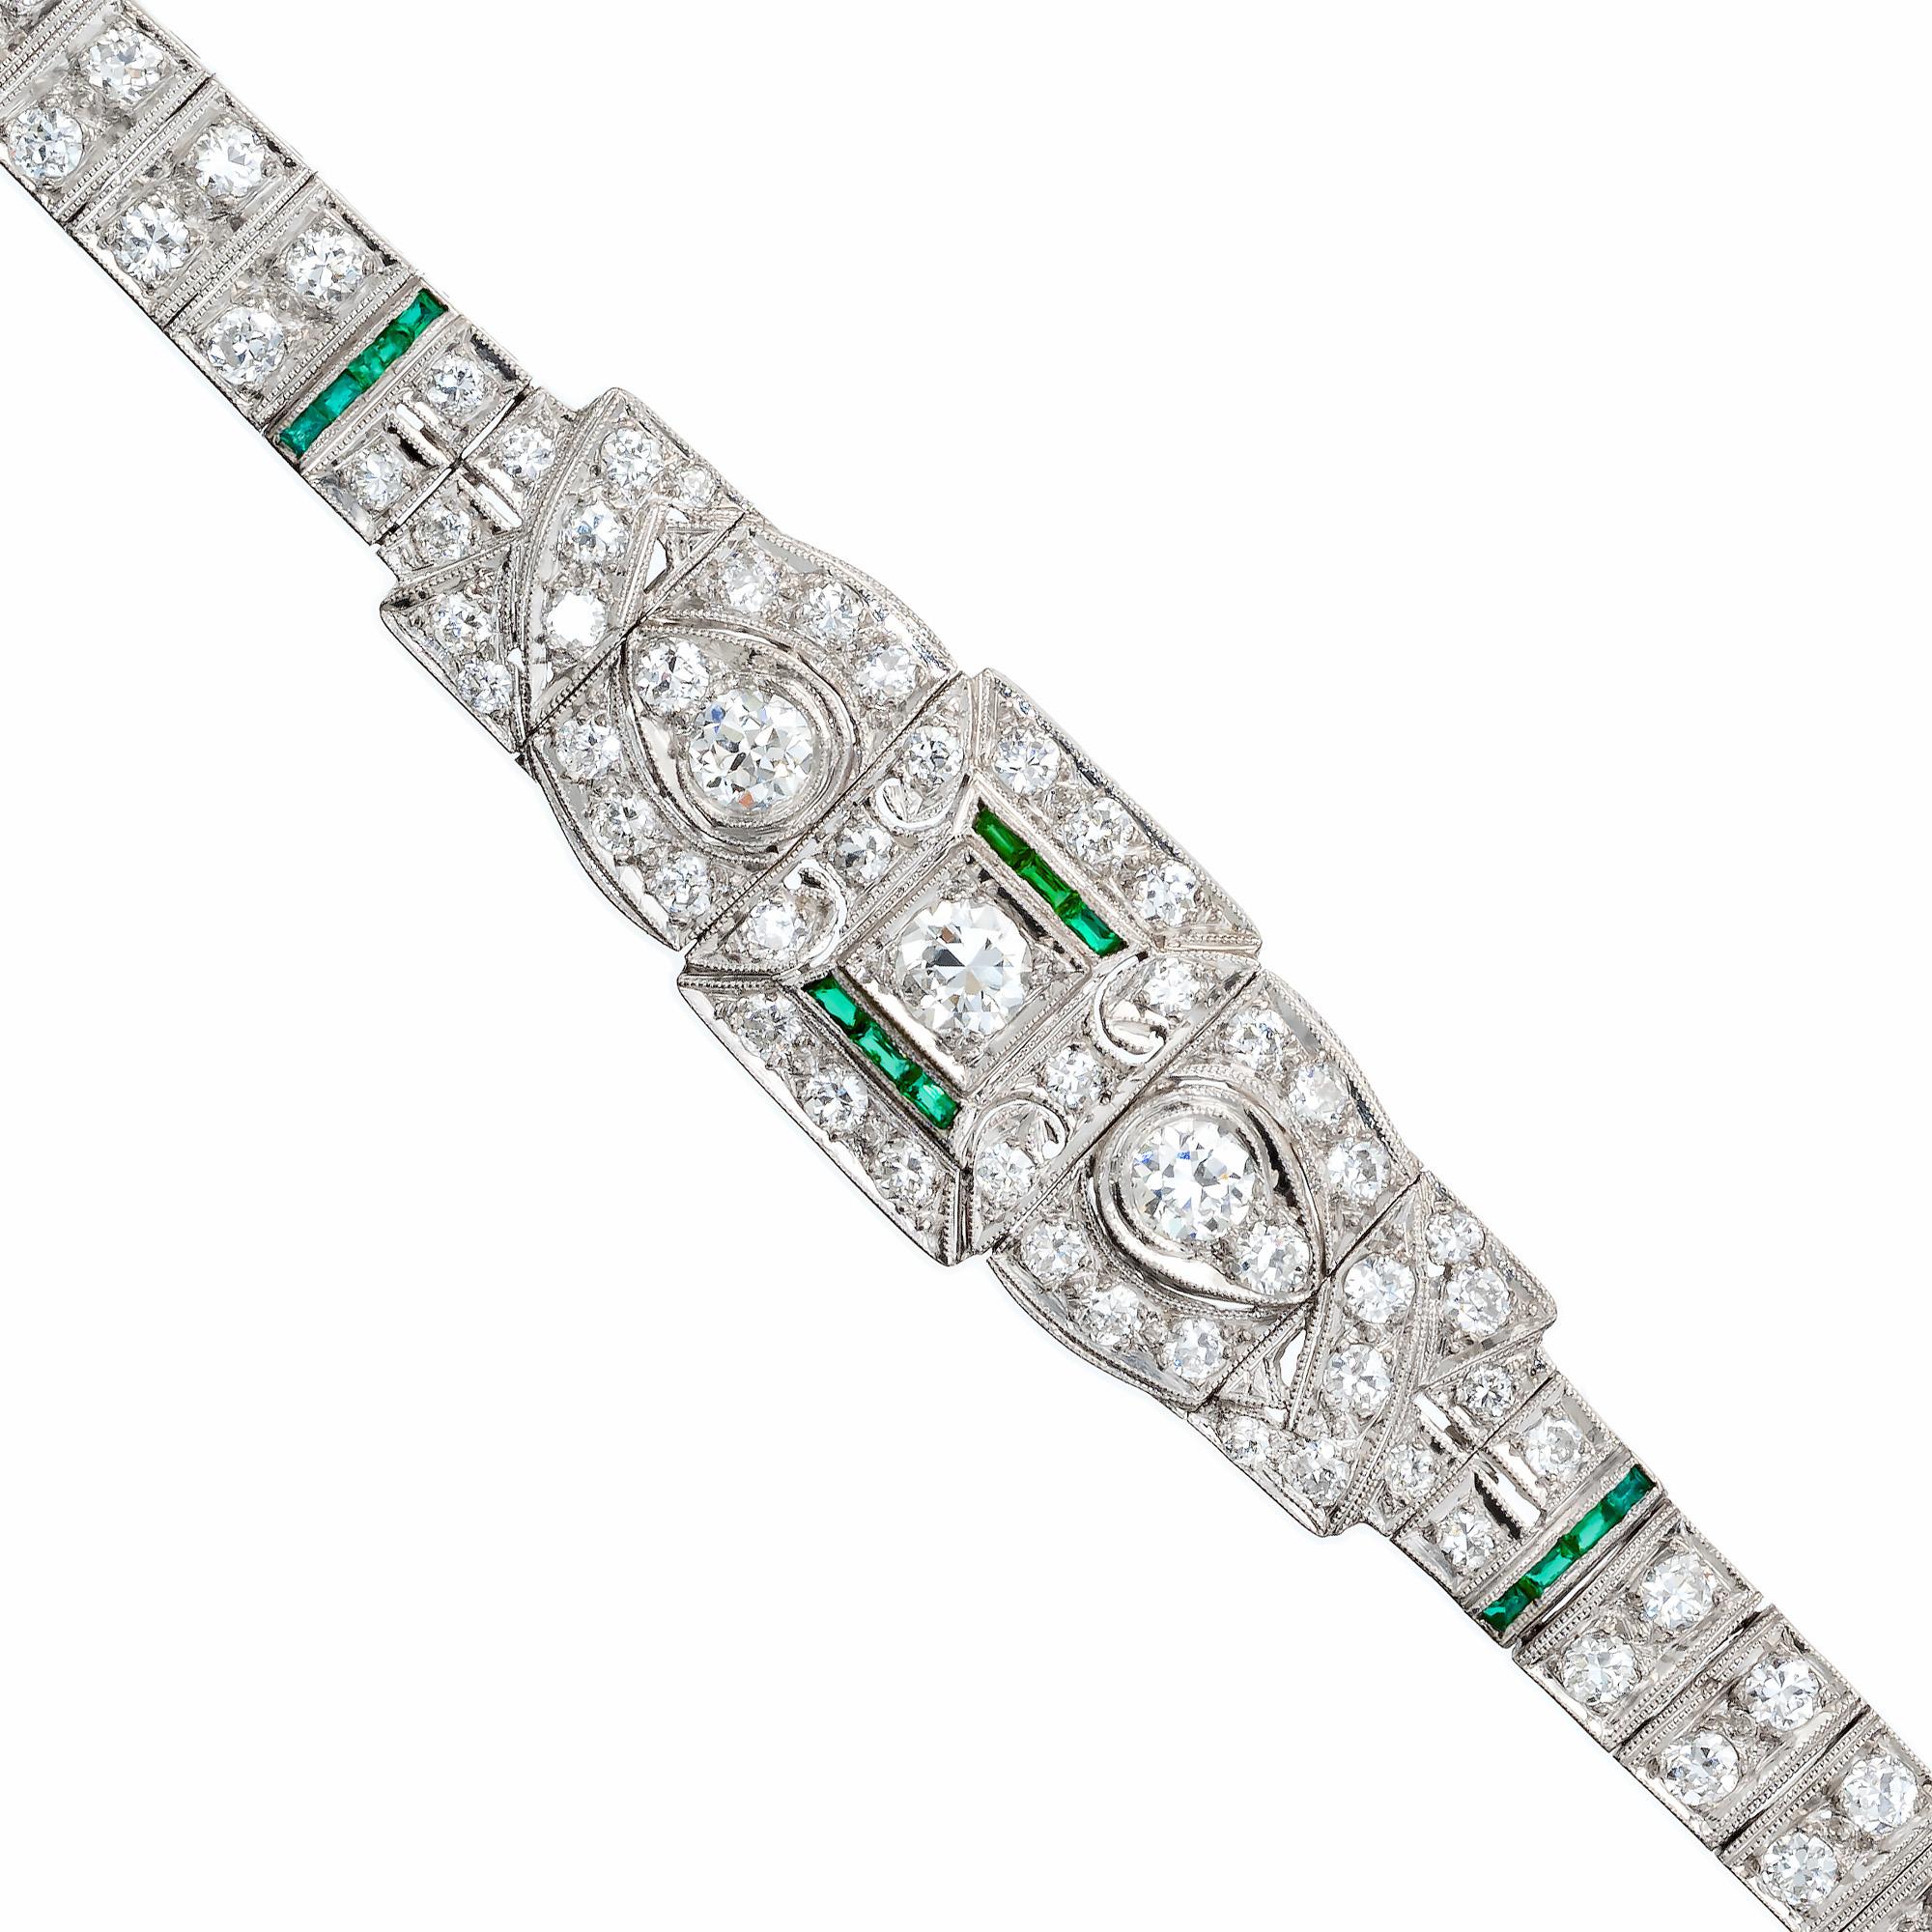 1920's Art Deco diamond and emerald bracelet. This exquisite Art Deco platinum bracelet boasts 3 old European cut diamonds with the center stone partly framed with a half halo of 14 French cut emeralds which are accented buy 98 round cut diamonds